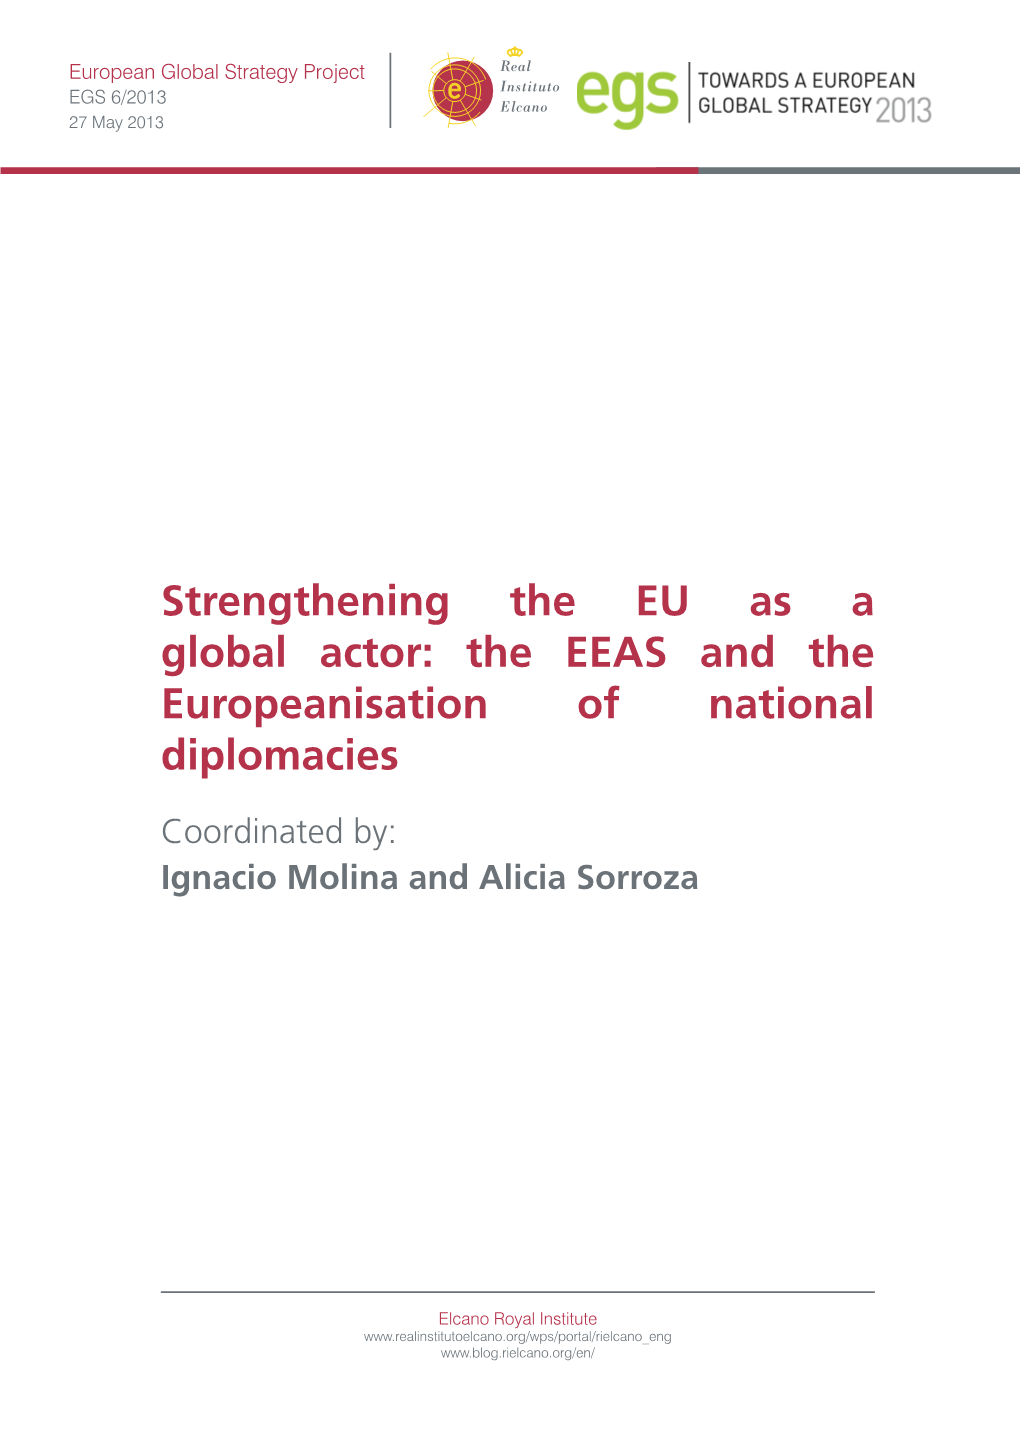 The EEAS and the Europeanisation of National Diplomacies